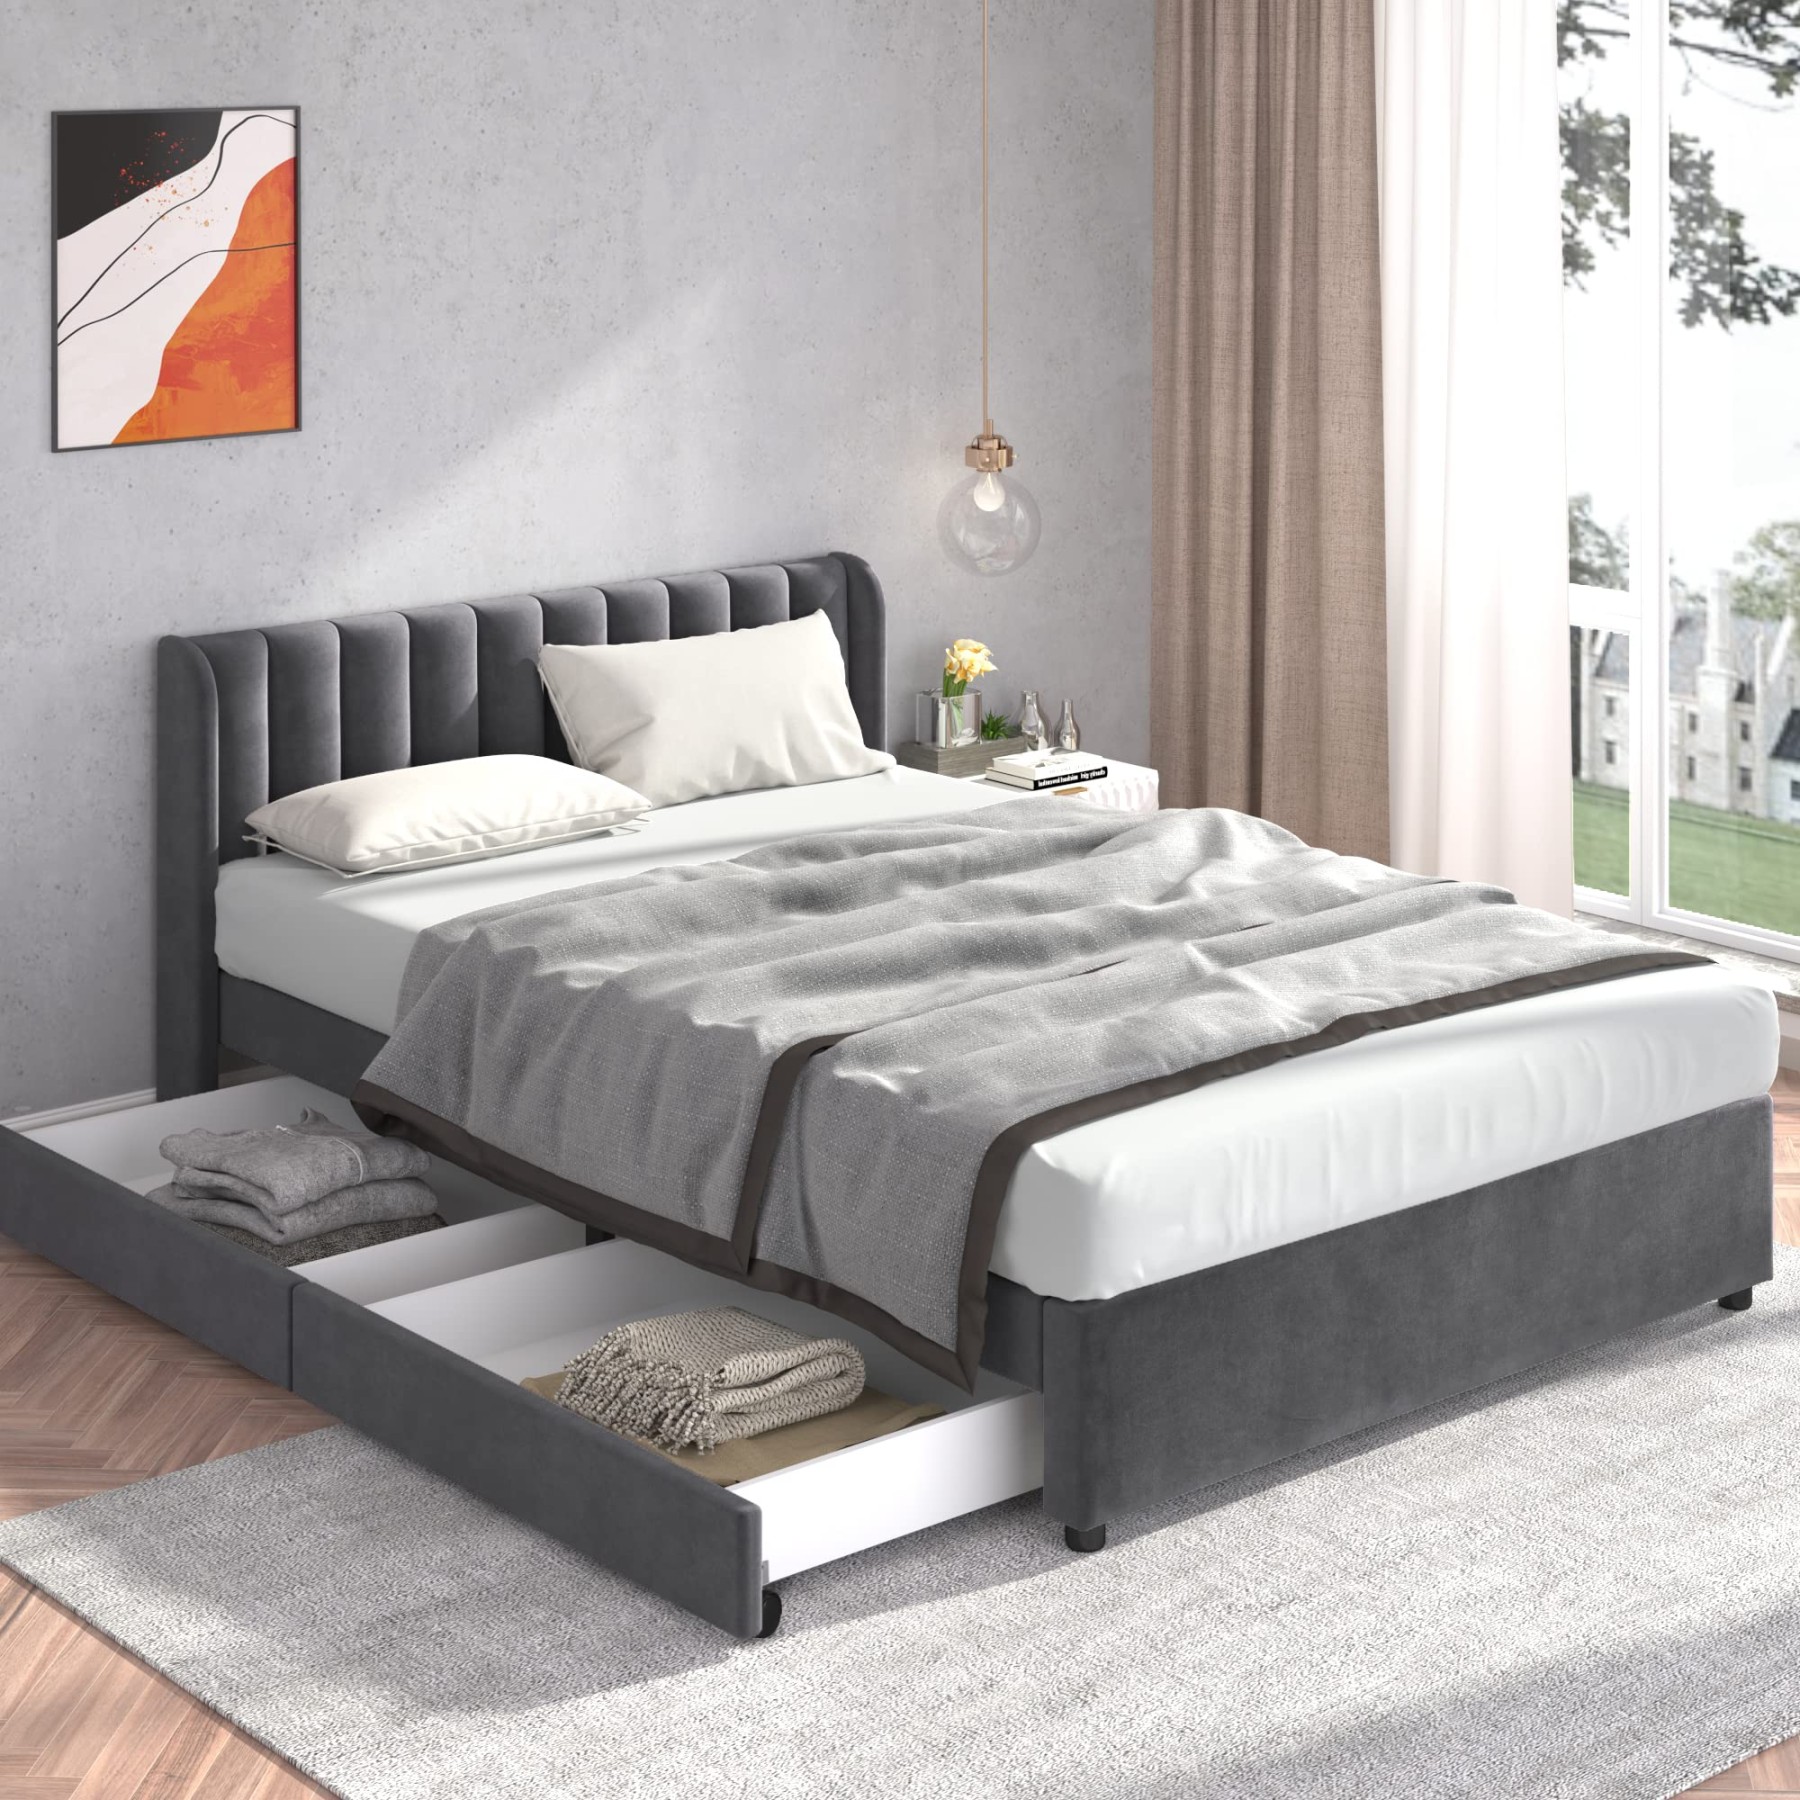 Upholstered Bed  x  cm with  Drawers, Flannel Double Bed with  Storage Space, Bed with Slatted Frame, Headboard Backrest, Modern Bed  Frame, Grey